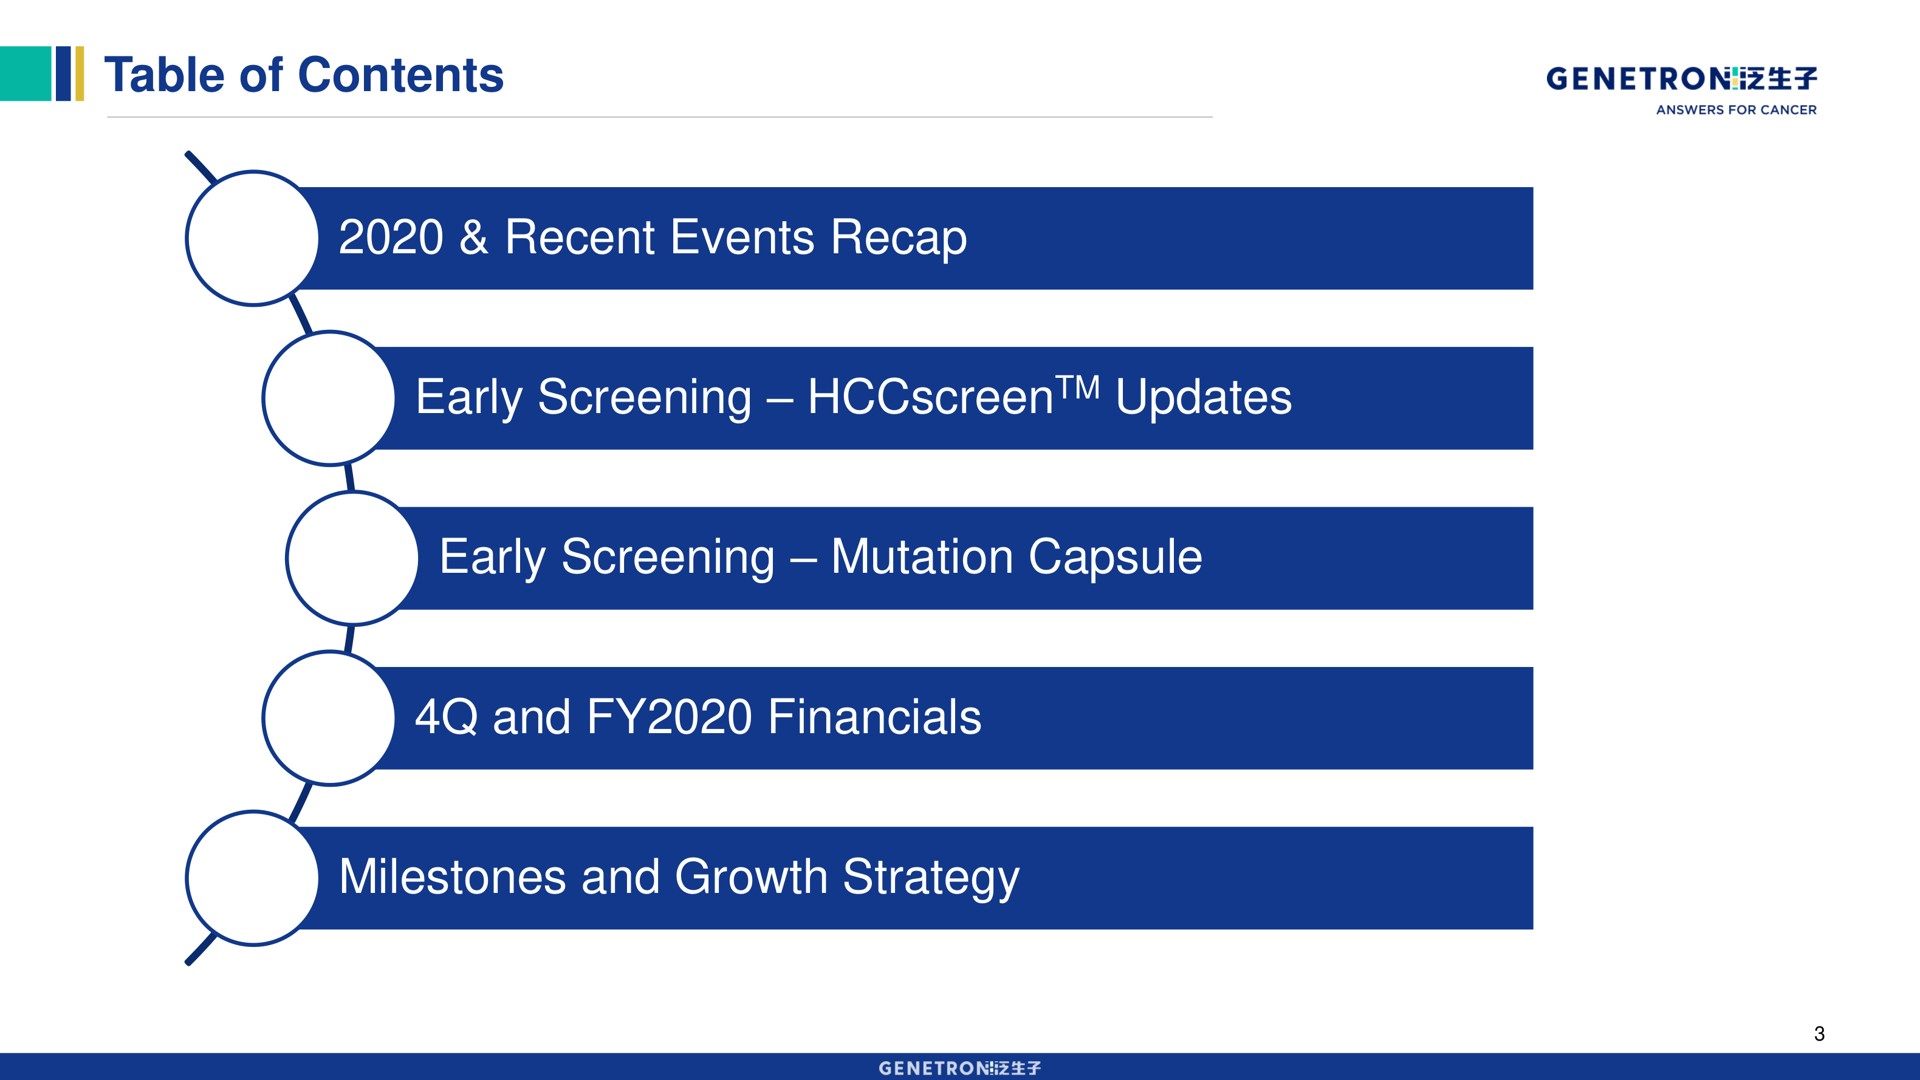 table of contents recent events recap early screening updates early screening mutation capsule and milestones and growth strategy | Genetron